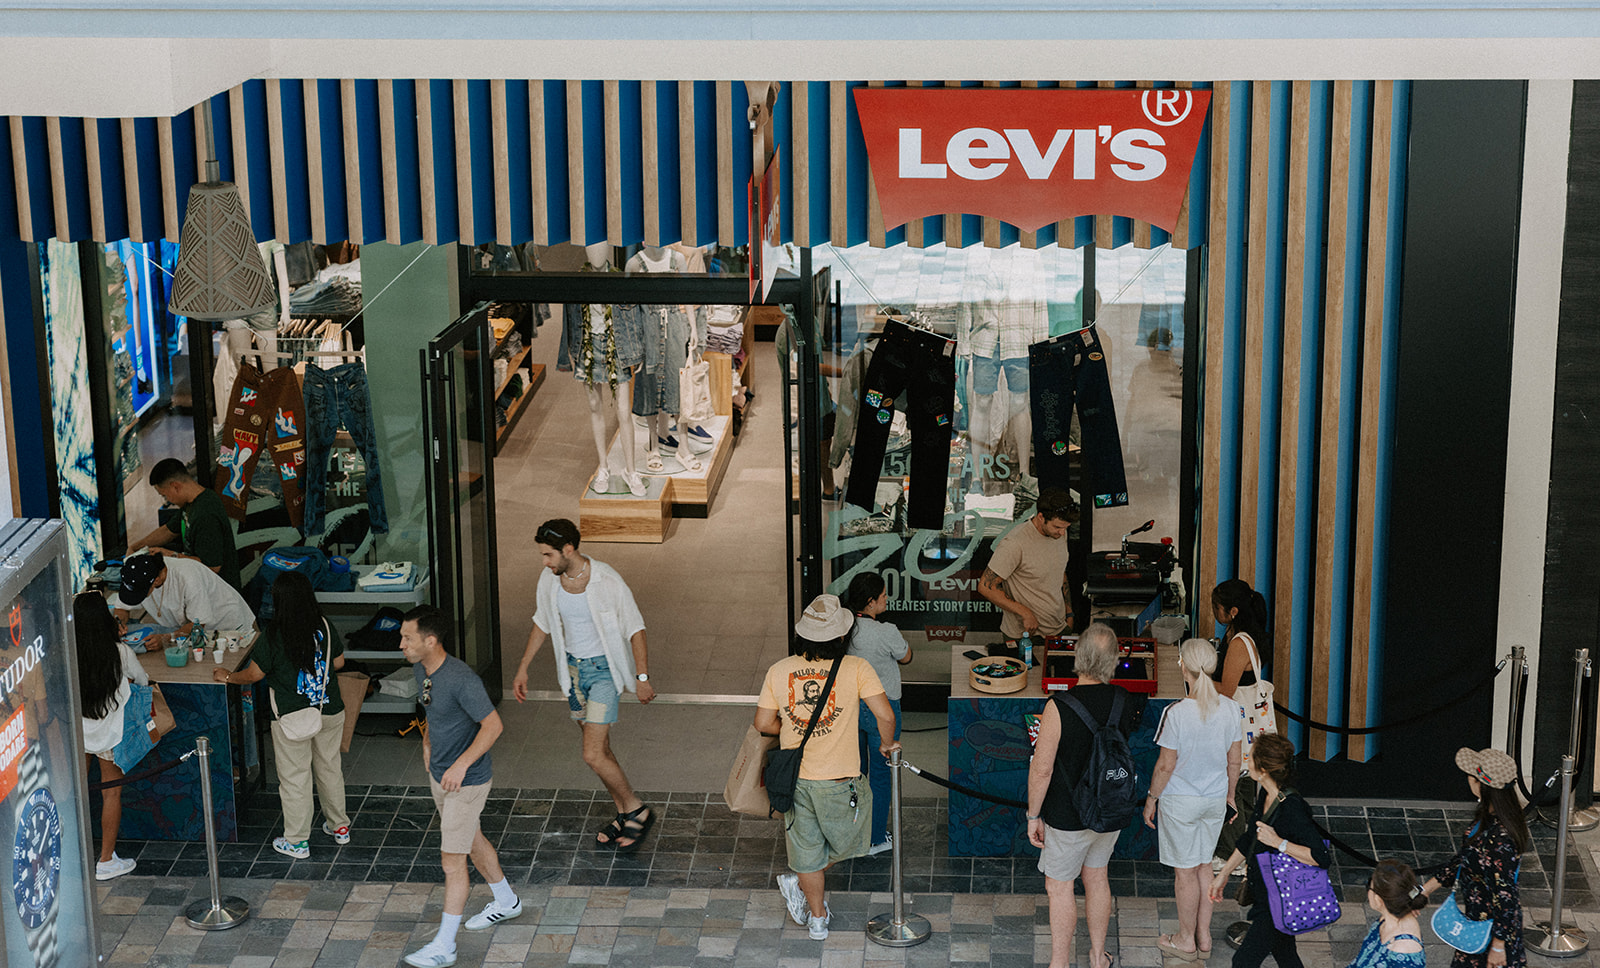 Exterior of the Ala Moana Center Levi's® store in Honolulu, Hawaii